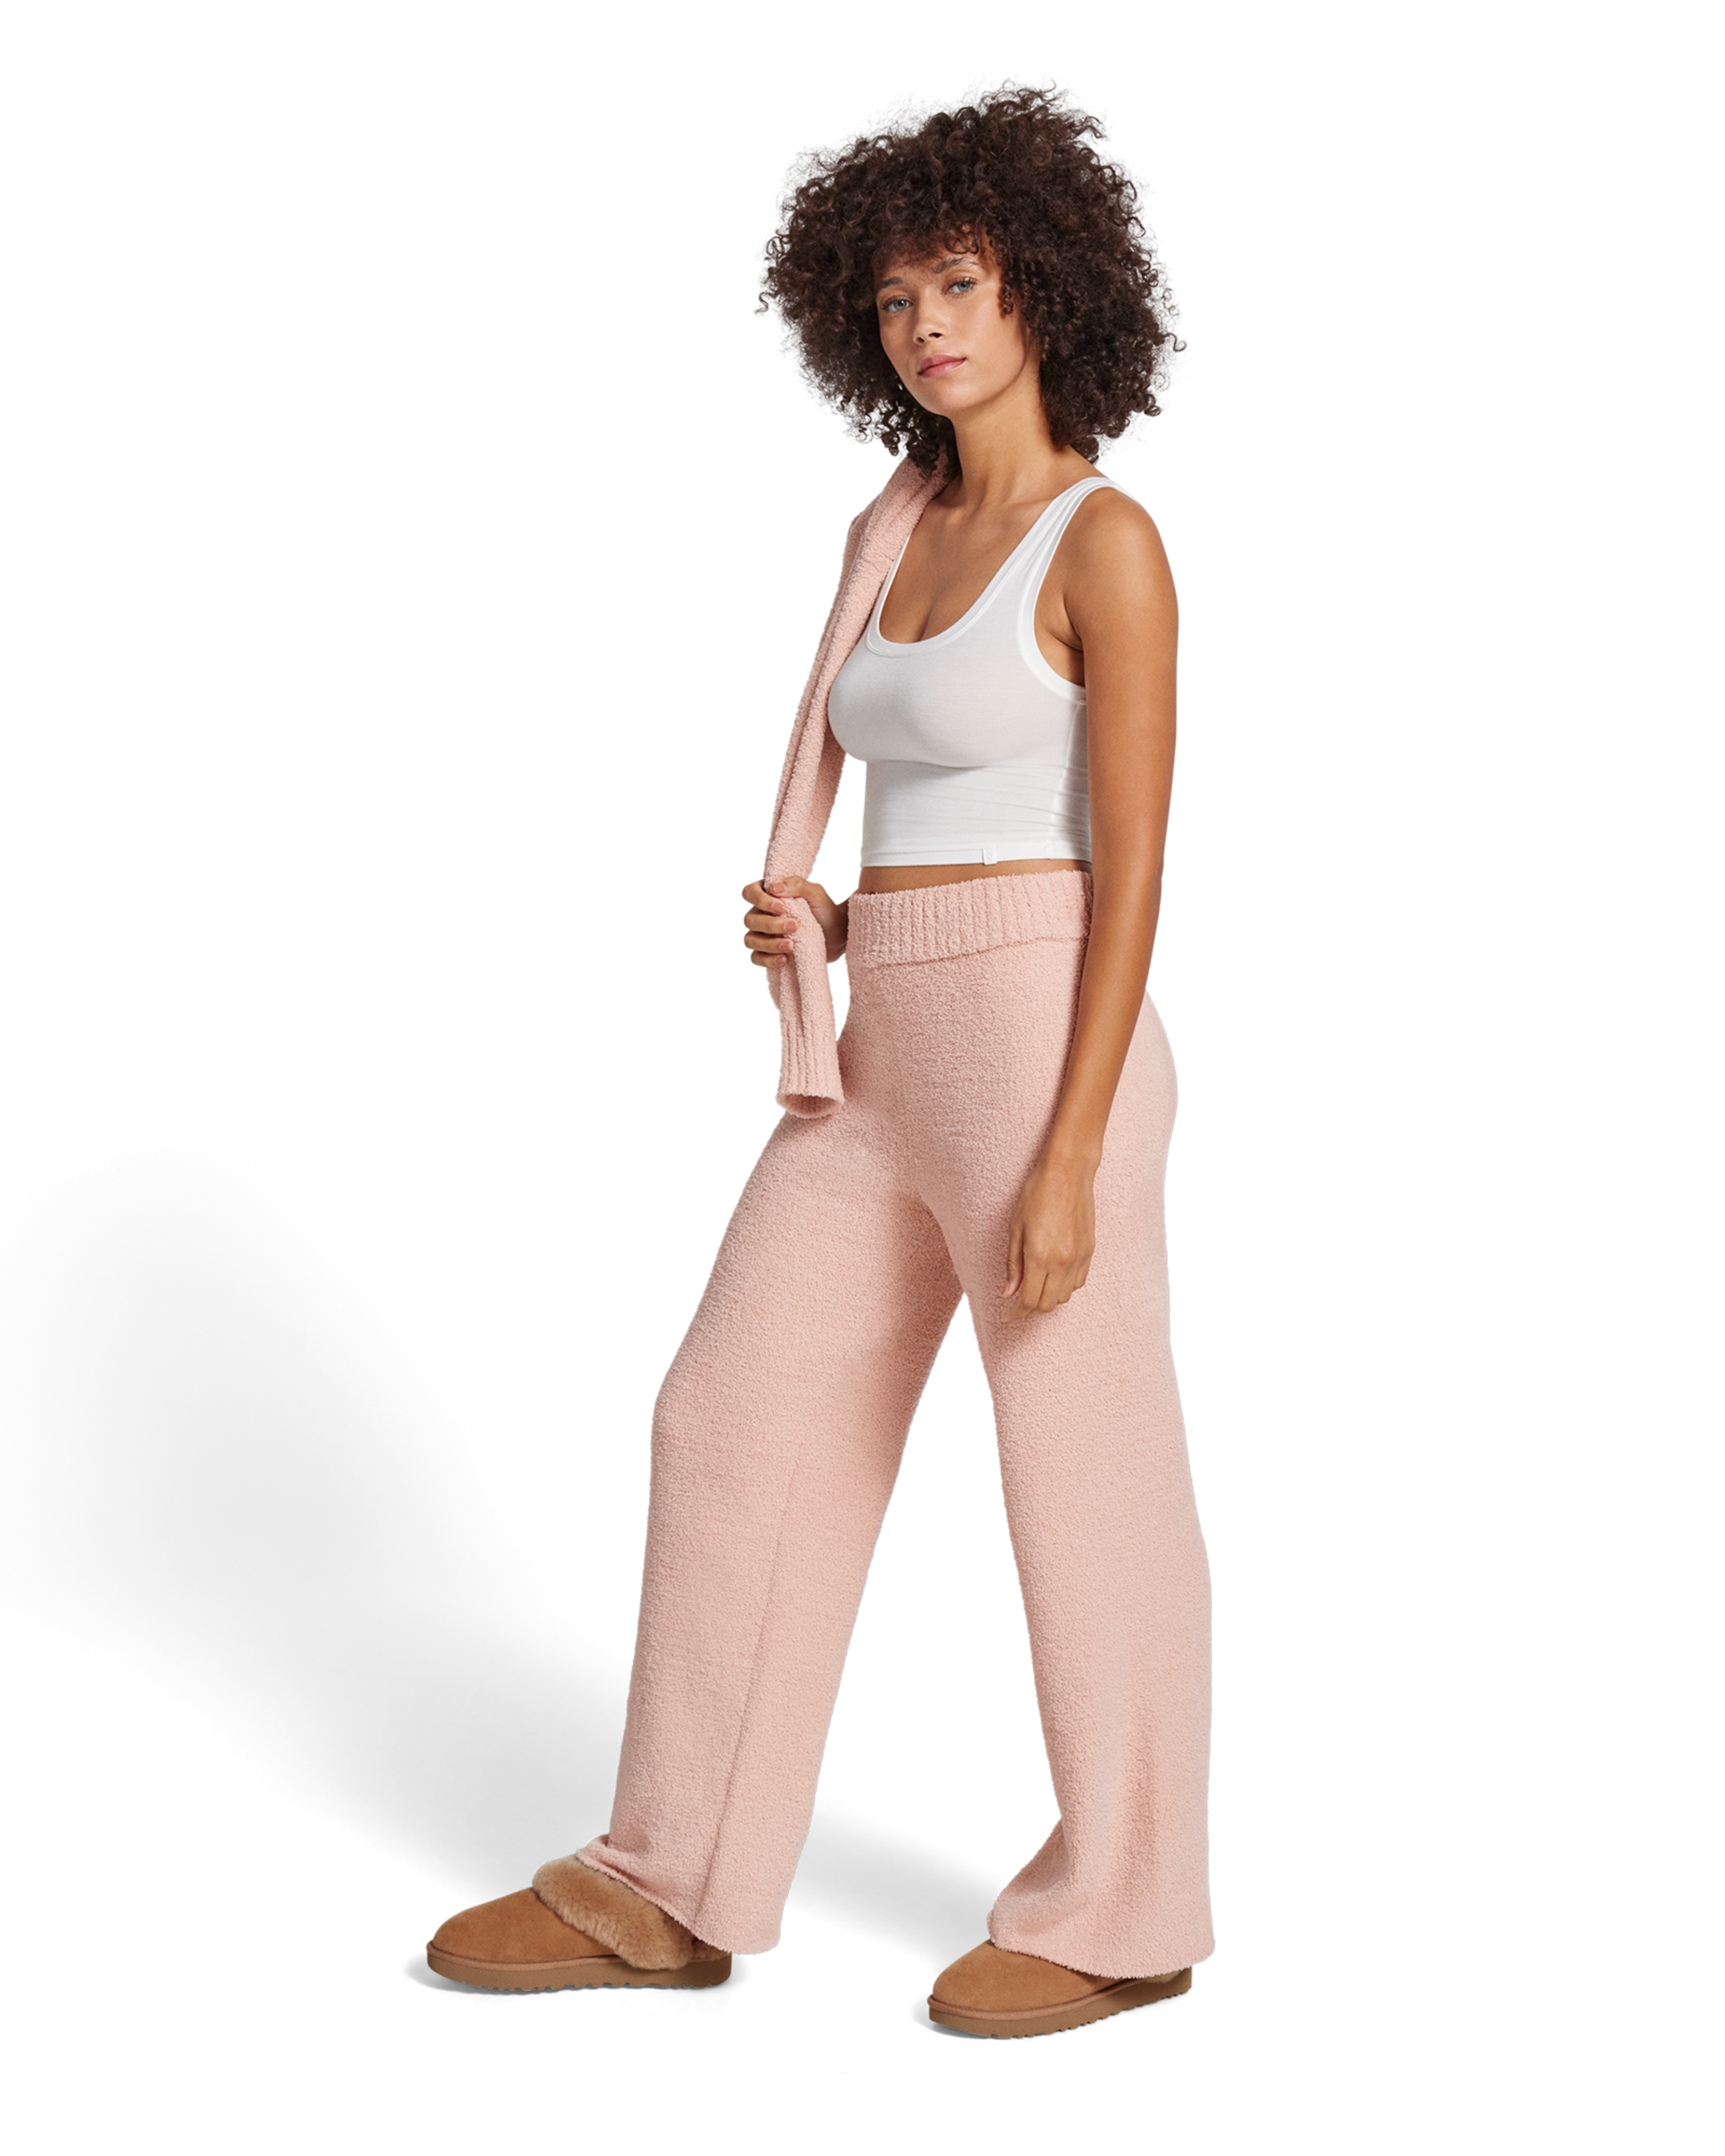 Women's Perfectly Cozy Wide Leg Lounge Pants - Stars Above™ Pink